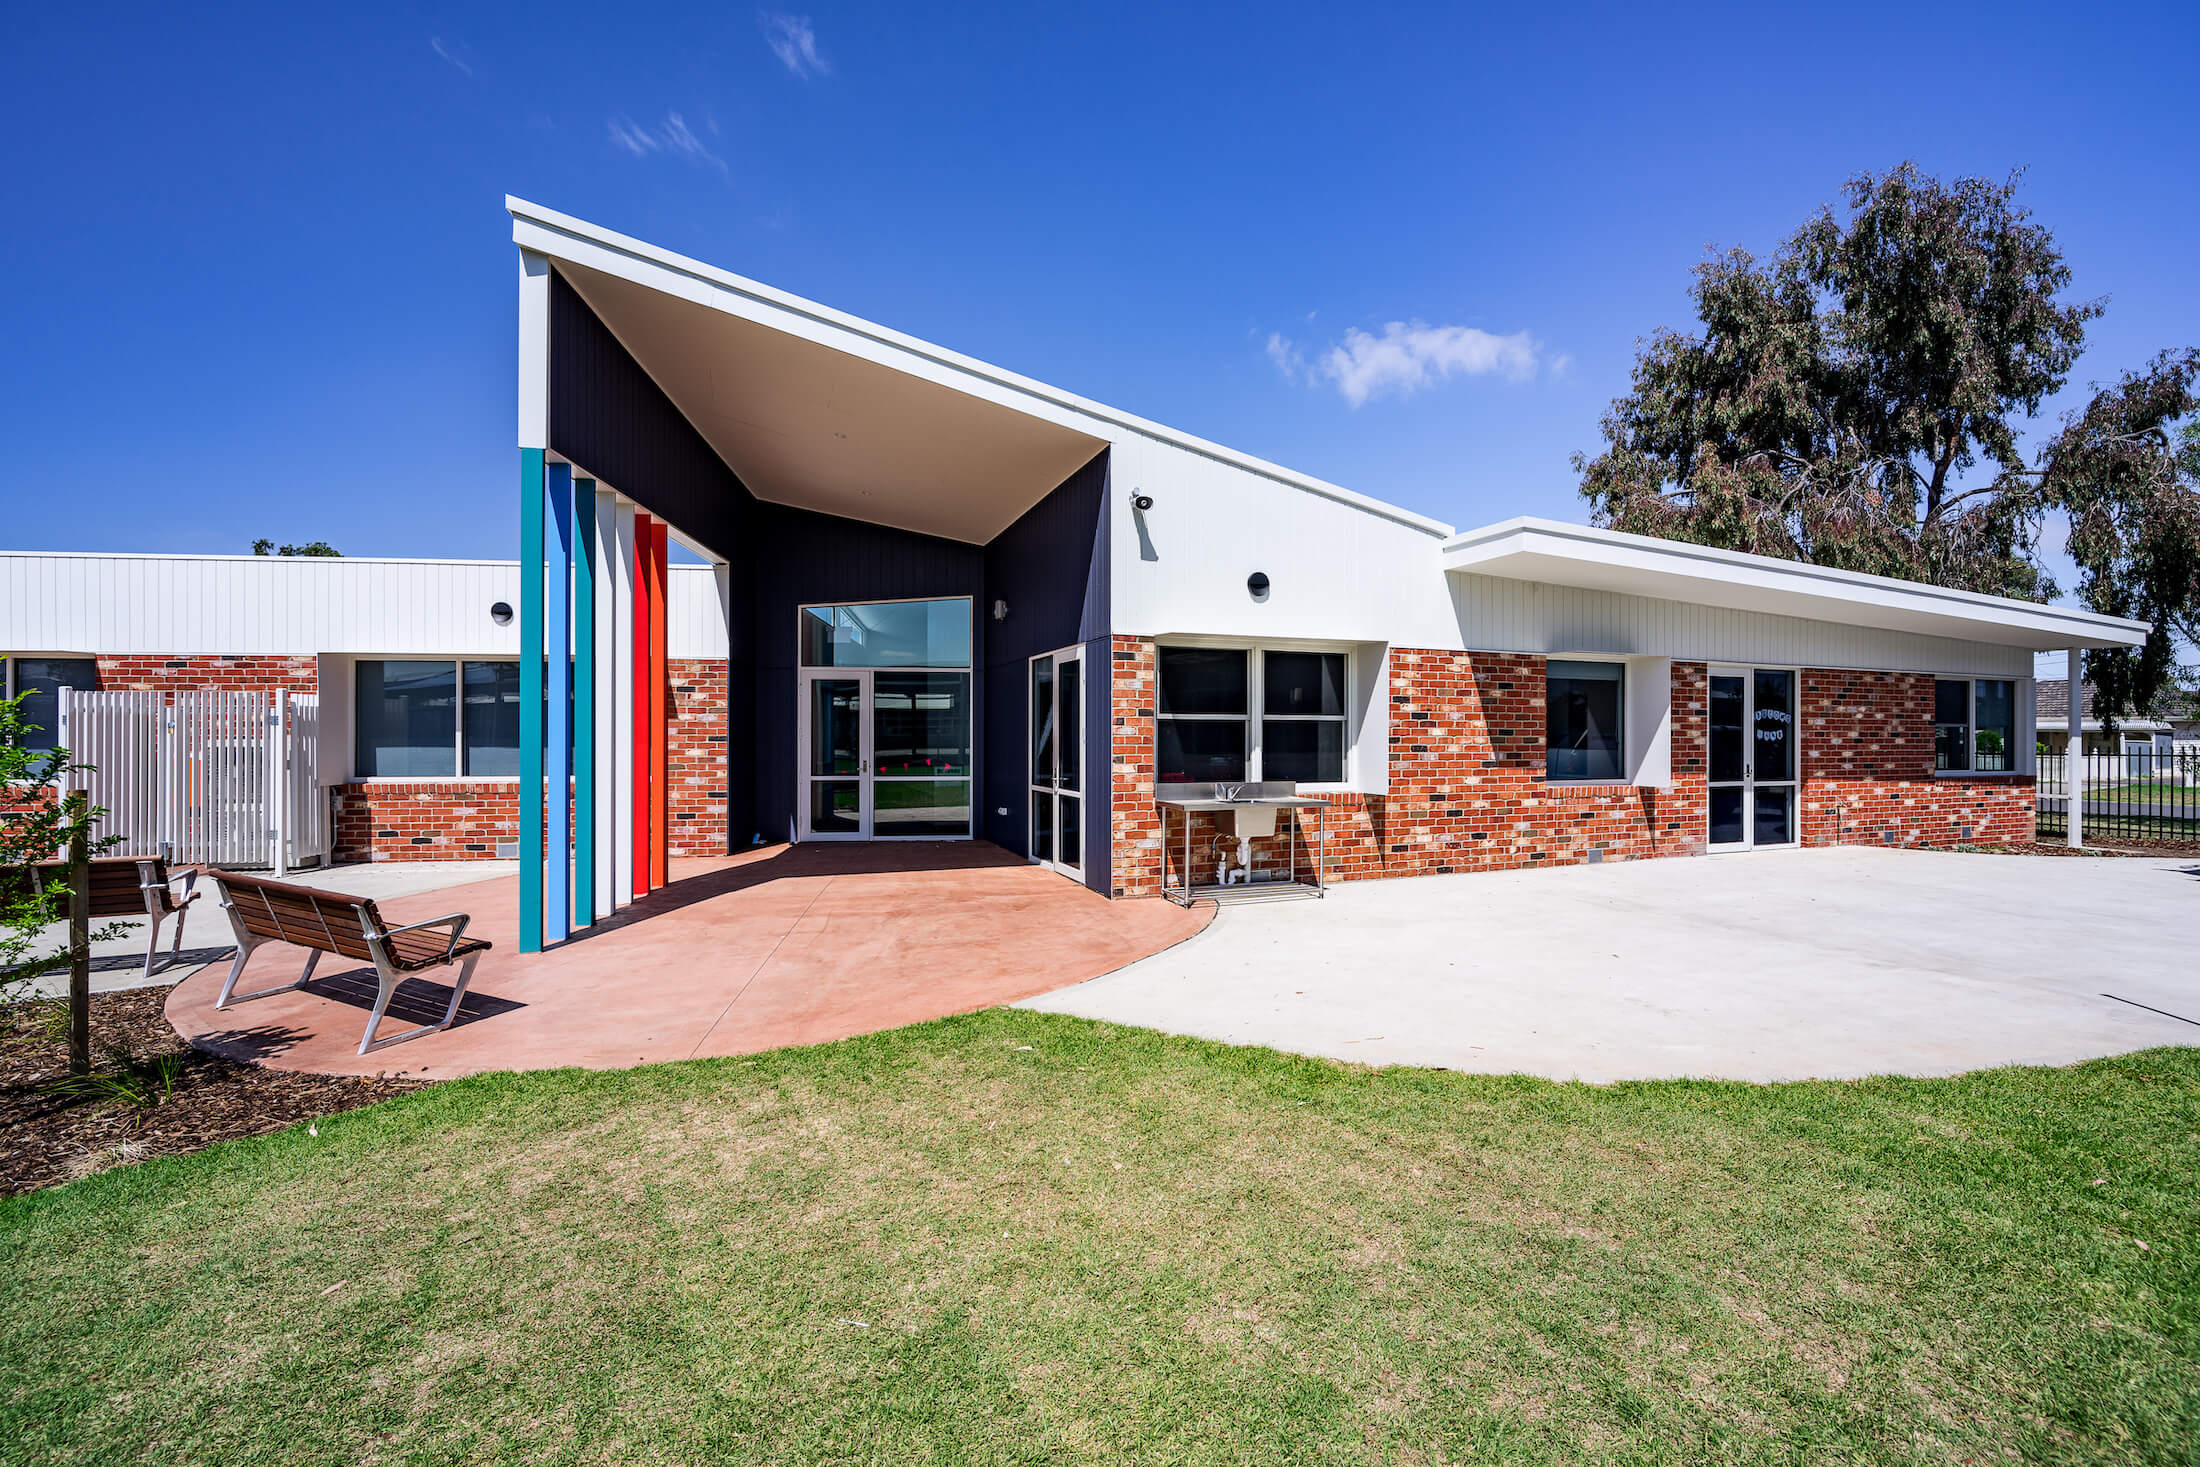 Brick school entry with colourful feature and angular canopy